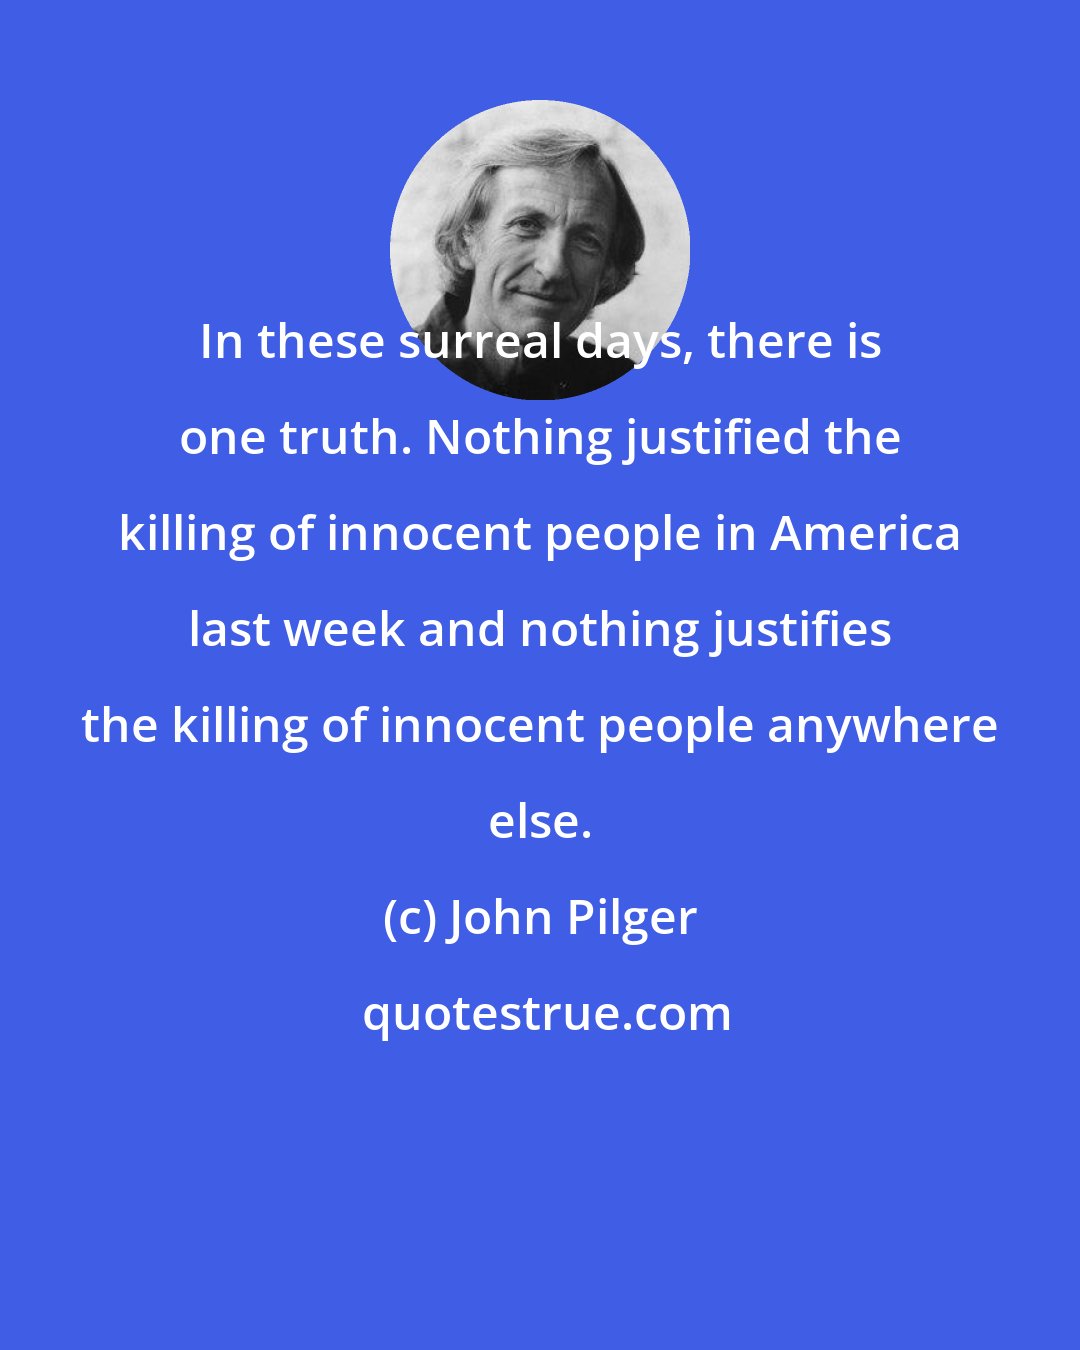 John Pilger: In these surreal days, there is one truth. Nothing justified the killing of innocent people in America last week and nothing justifies the killing of innocent people anywhere else.